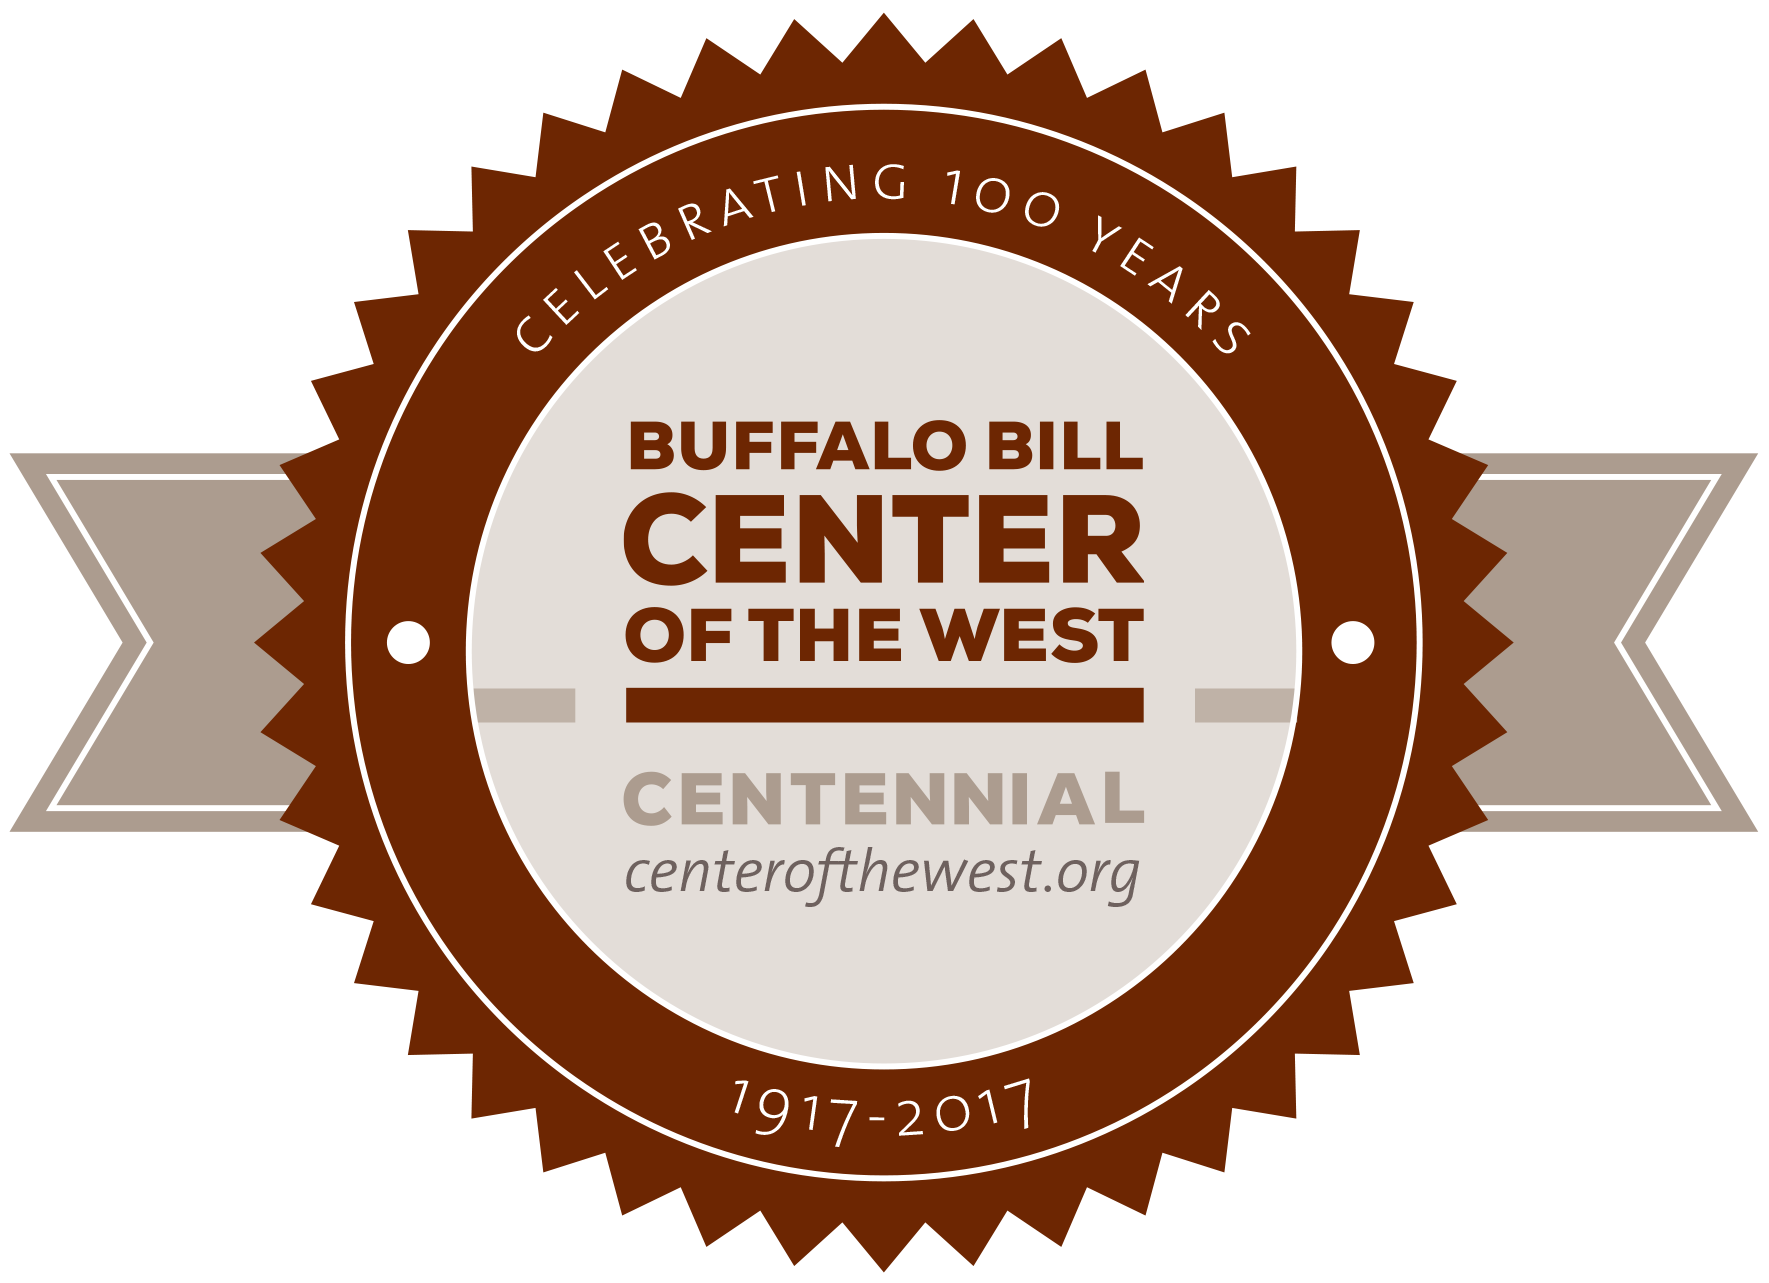 Buffalo Bill Center of the West celebrates its Centennial in 2017.